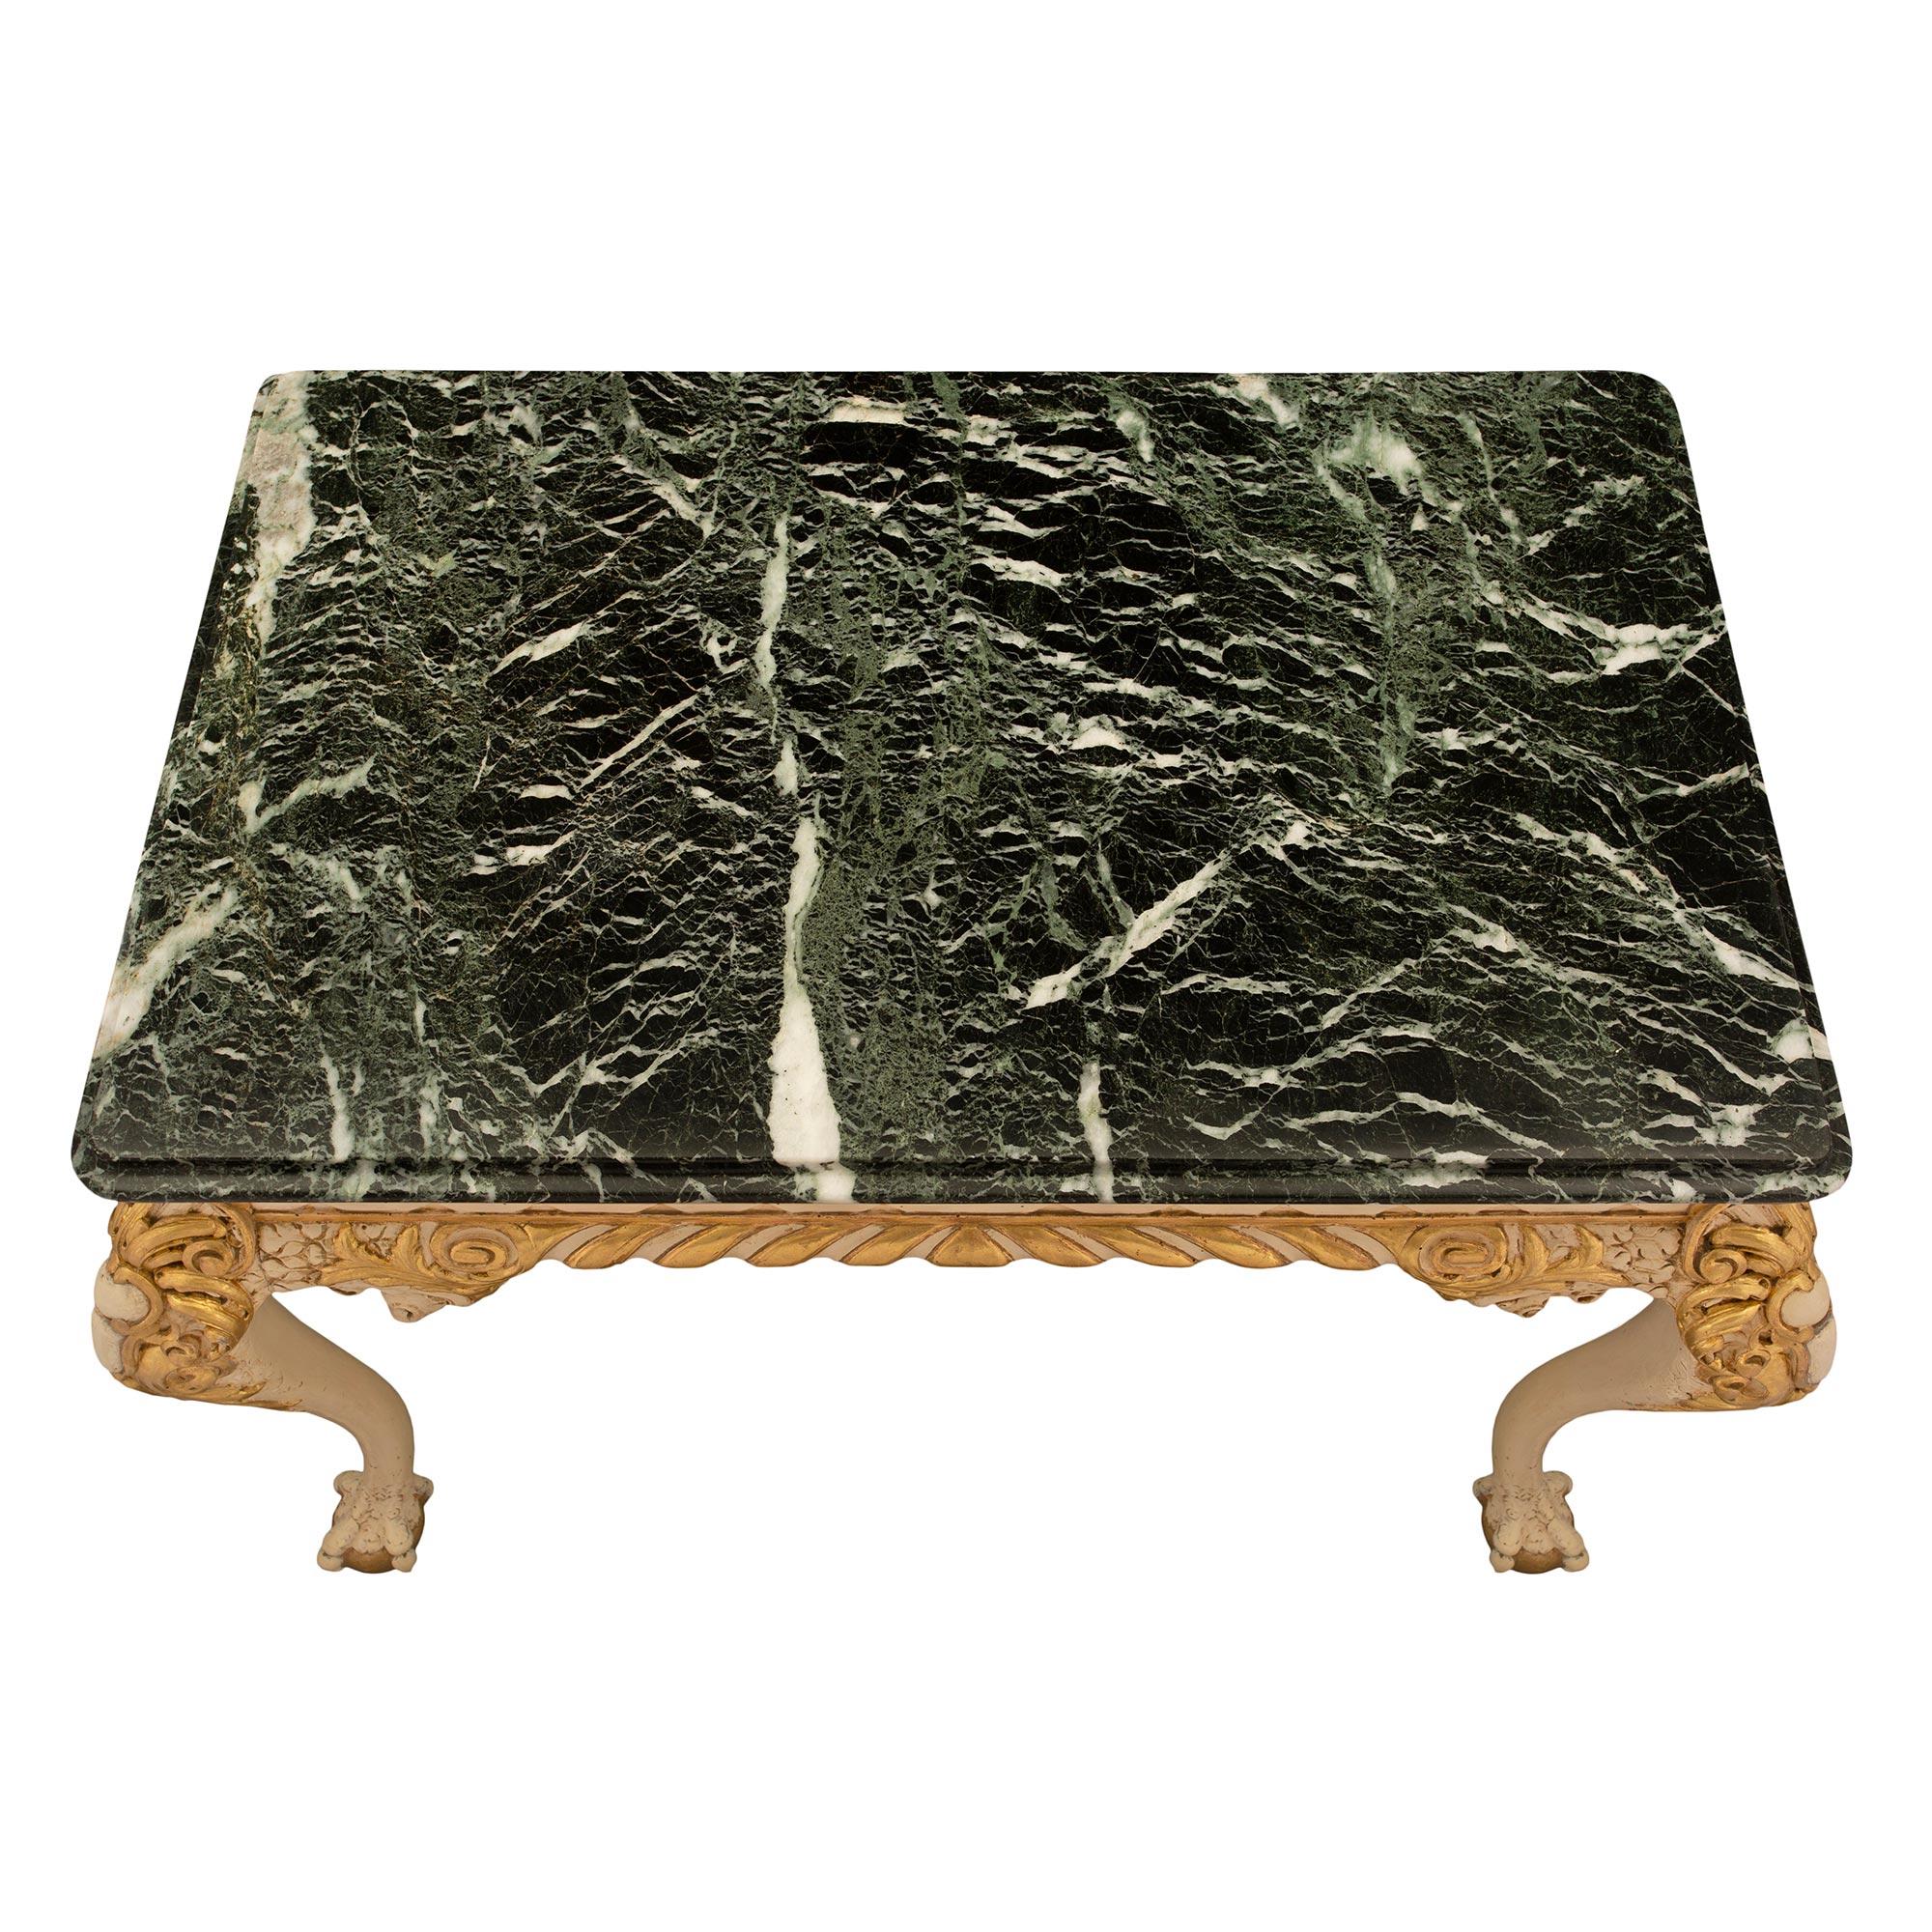 A striking English 19th century George II st. patinated, giltwood and marble center table. The rectangular table is raised by handsome patinated claw and giltwood ball feet and most impressive cabriole legs with intricately detailed foliate